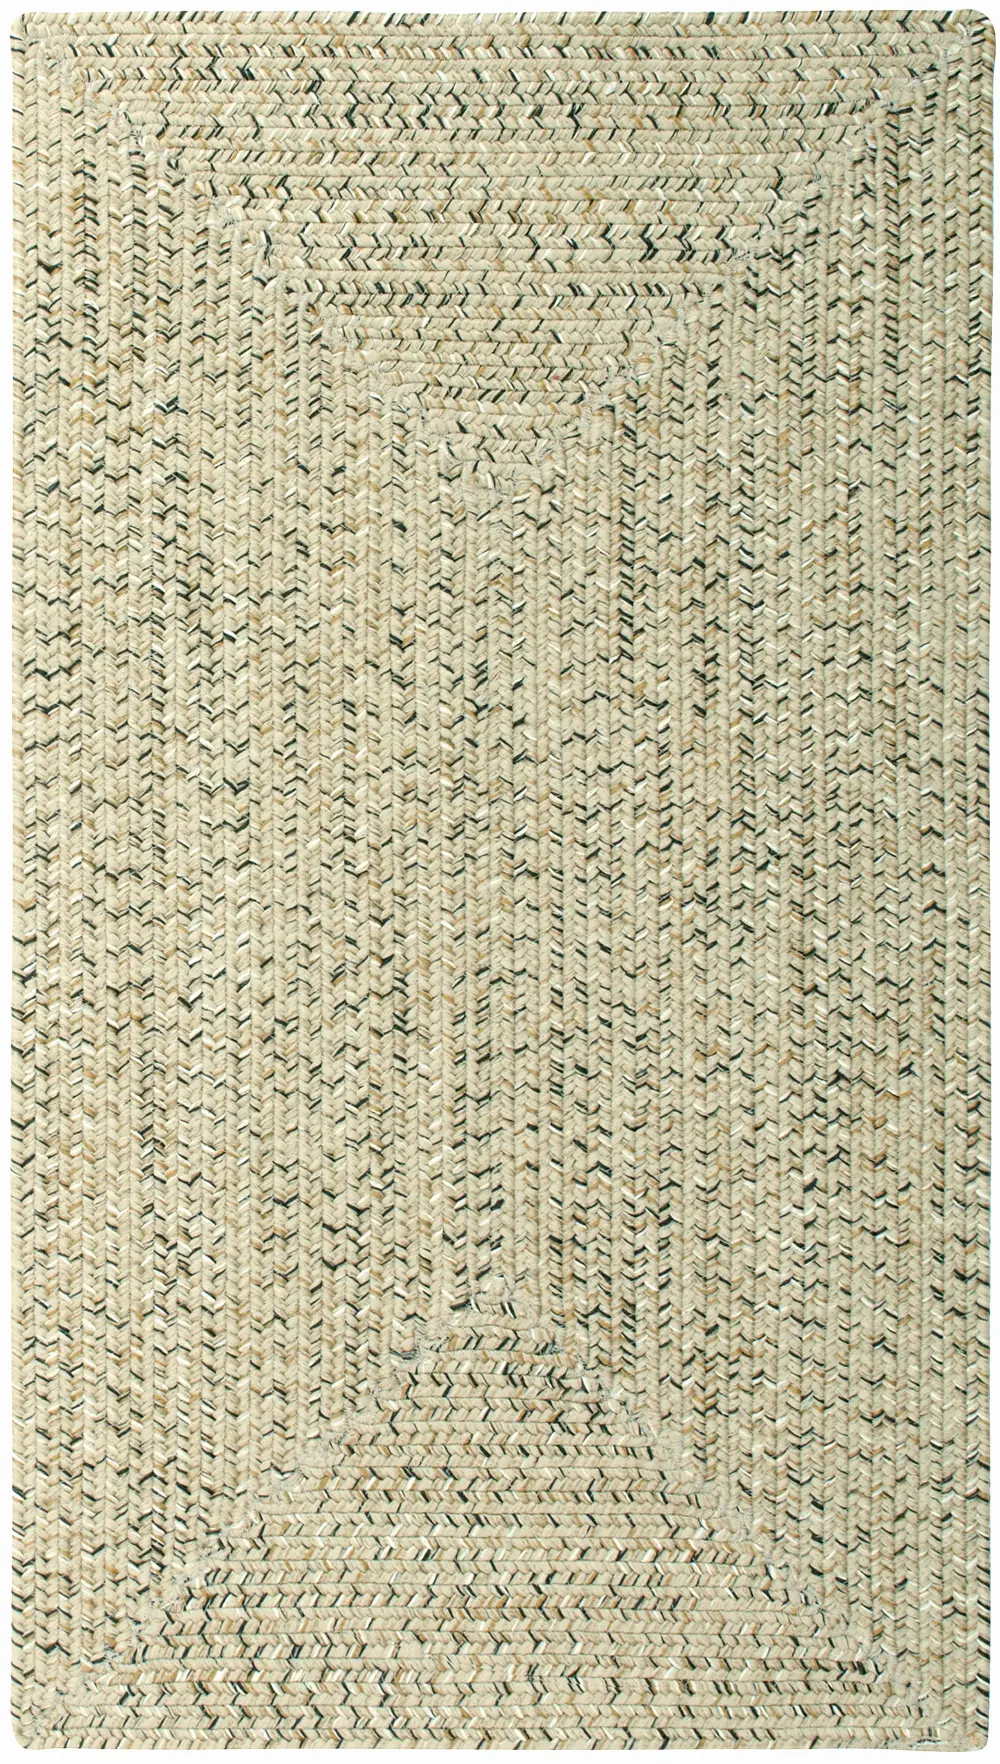 0110QS00240036600 2 x 3 X-Small Shell Taupe Braided Indoor-Outdoor Rug - Sea Glass-1